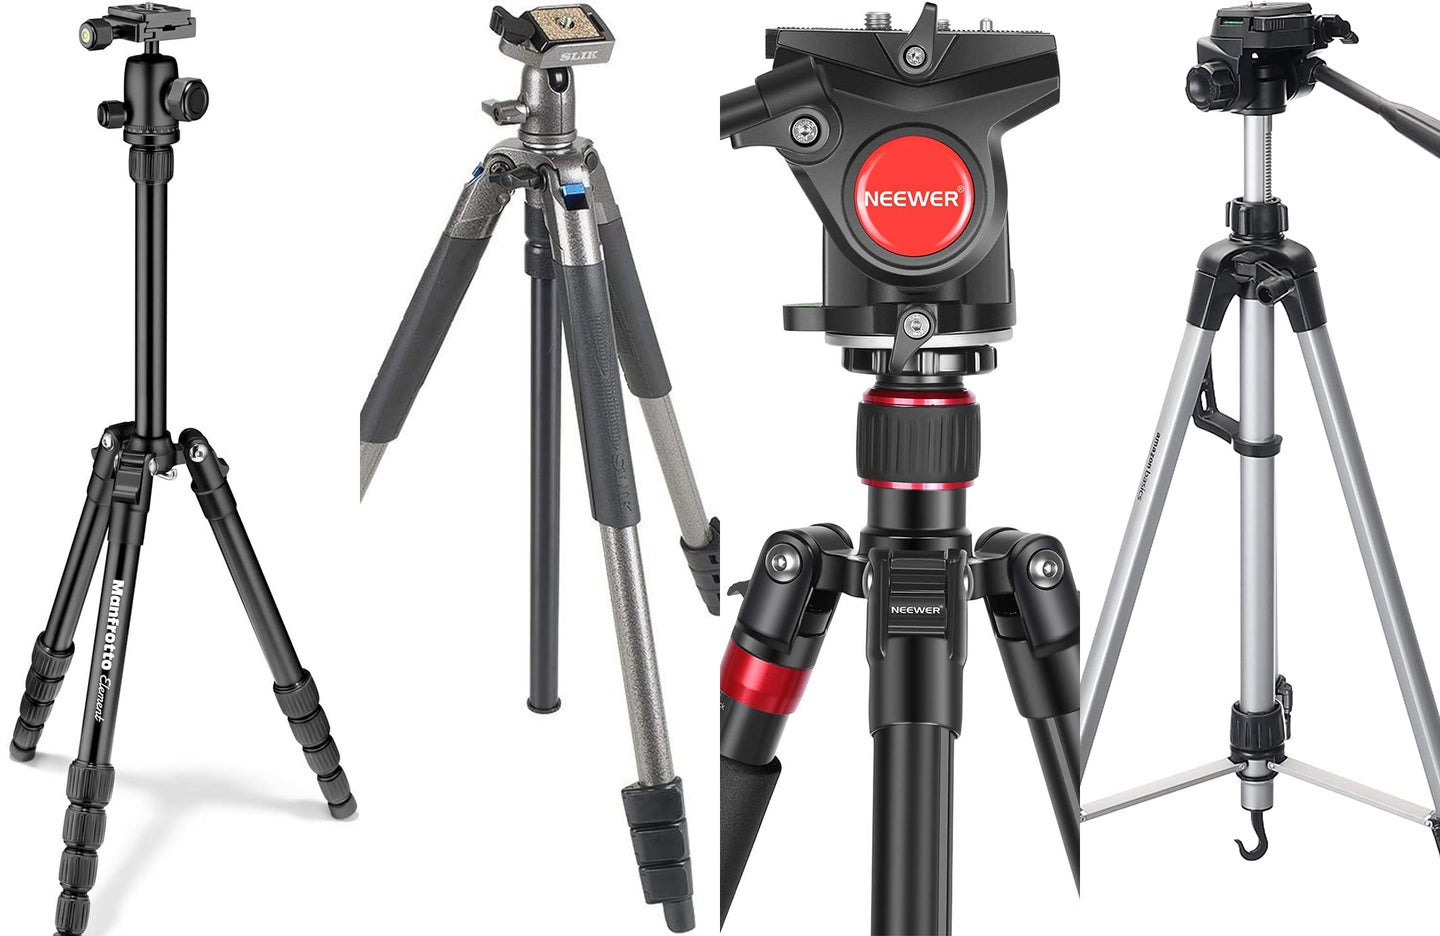 The best budget tripods